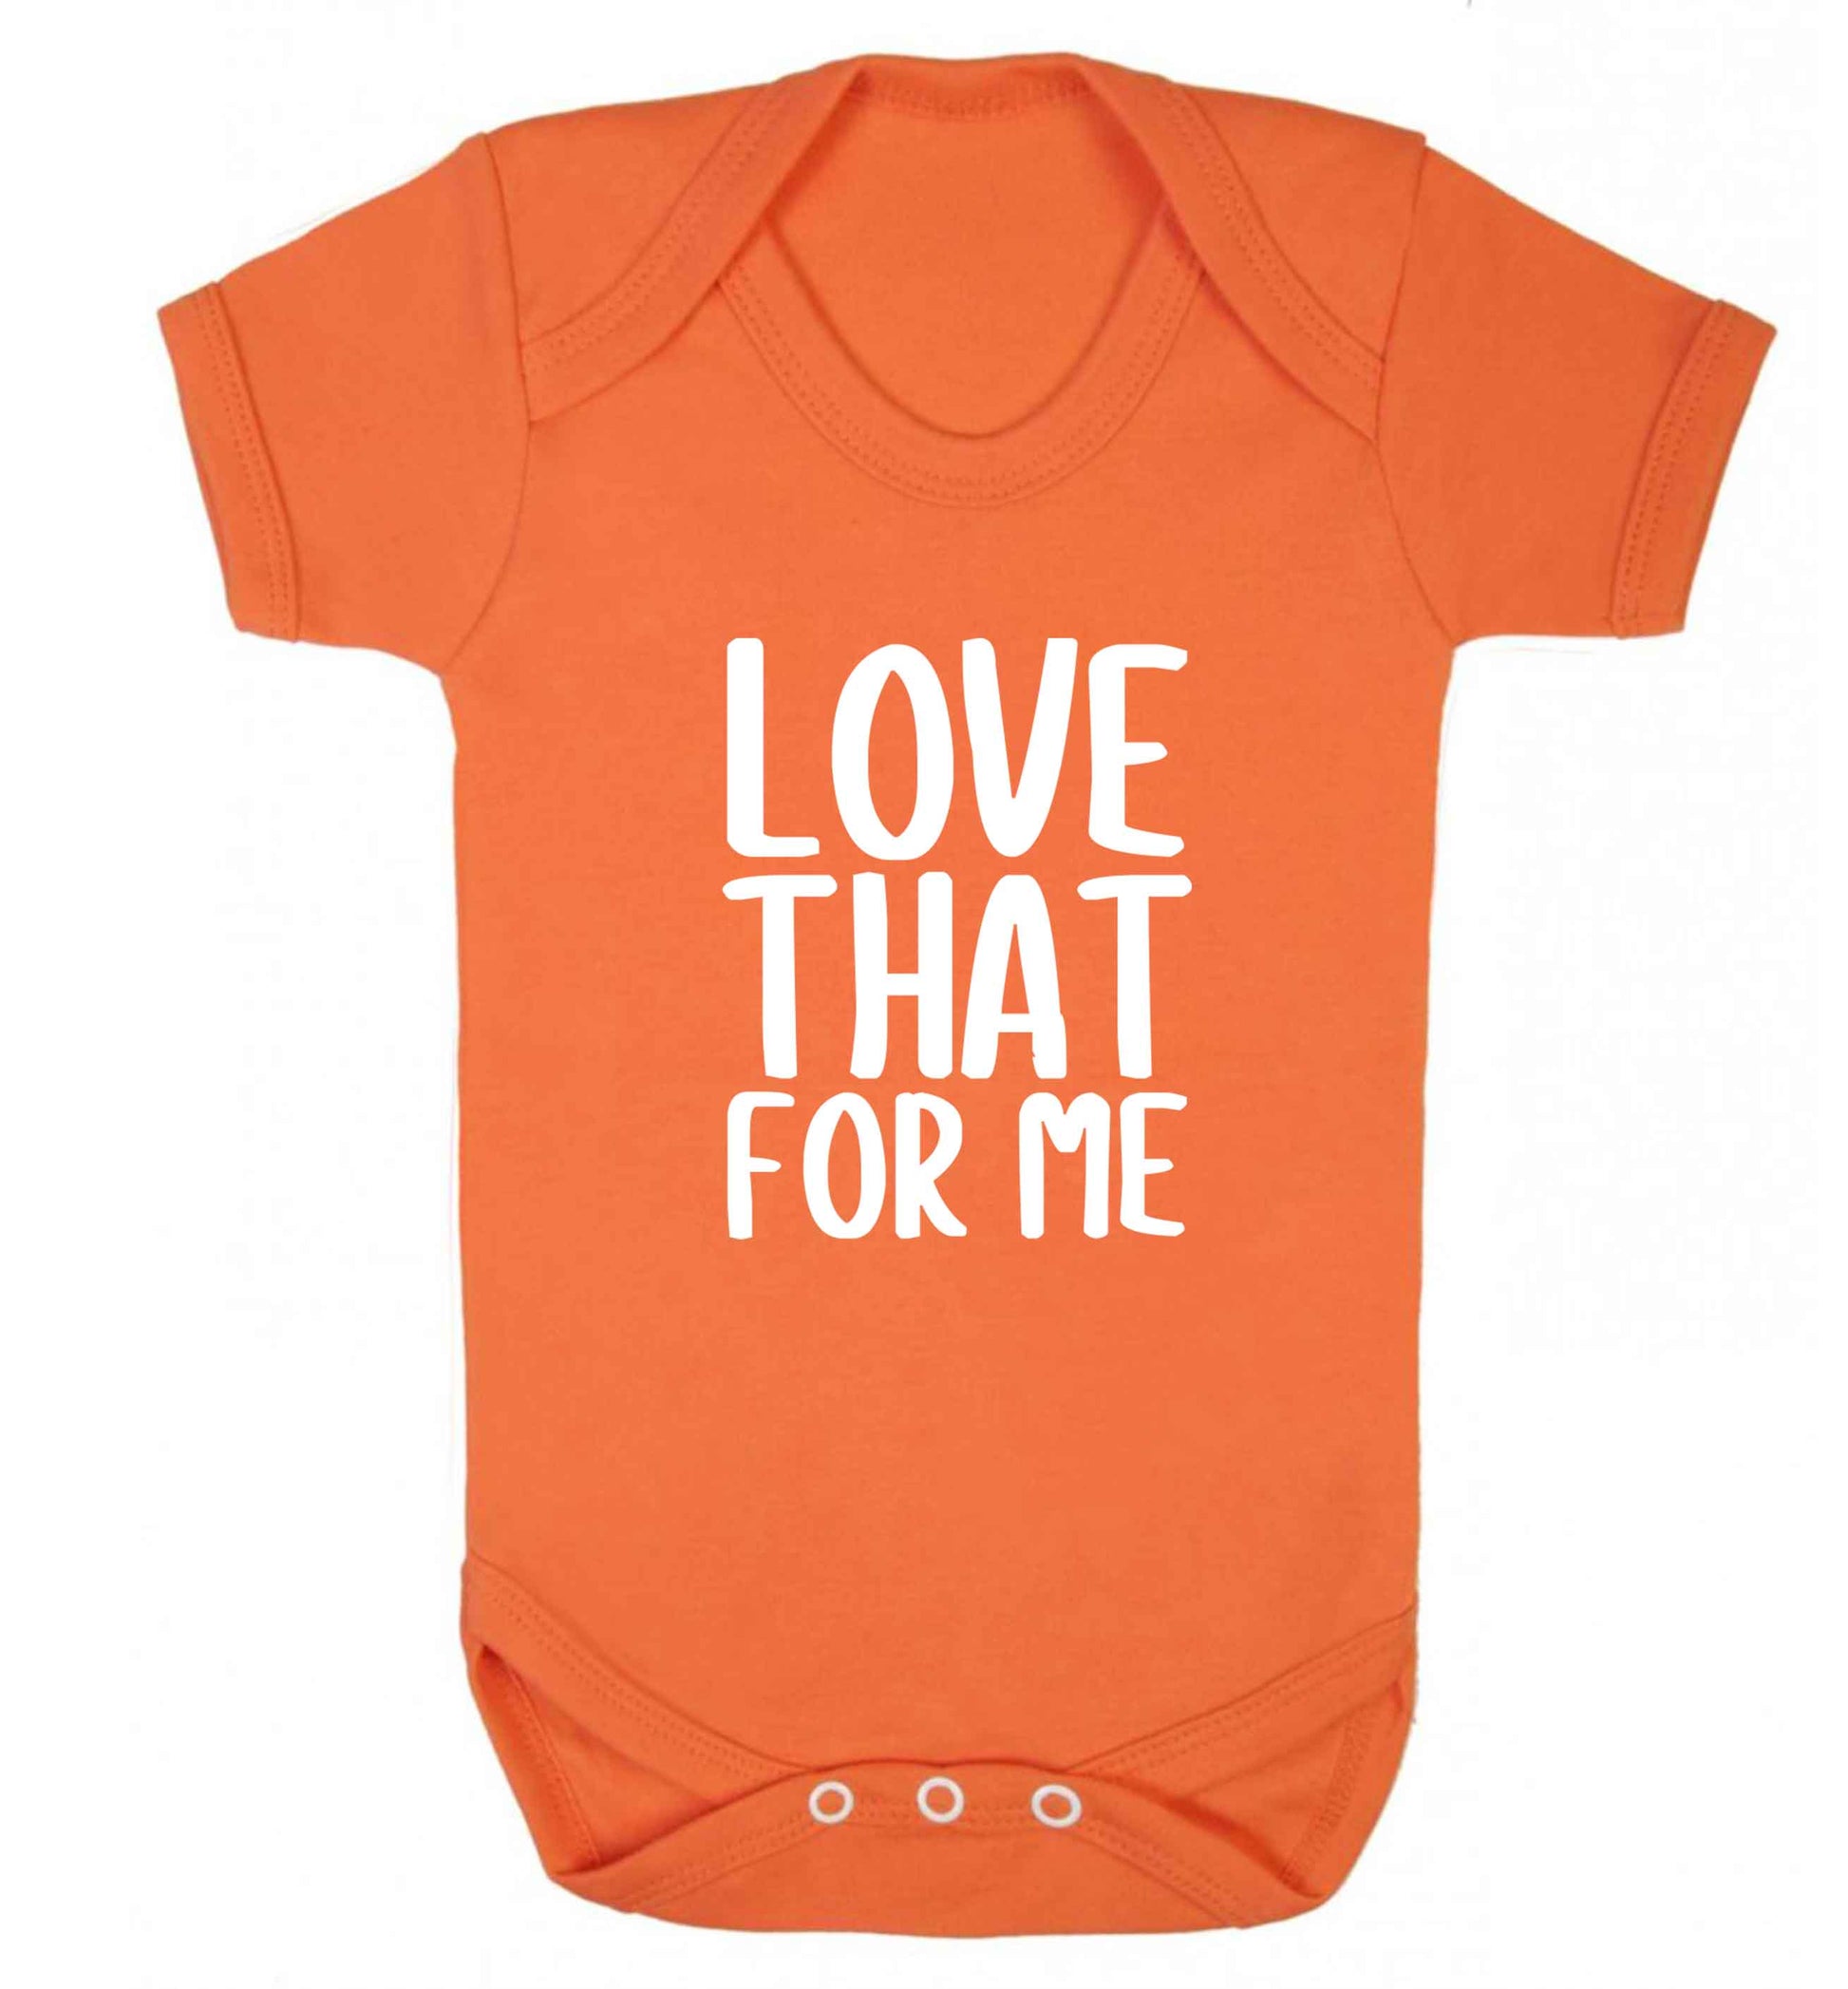 We love this for YOU! Who else loves saying this?!  baby vest orange 18-24 months